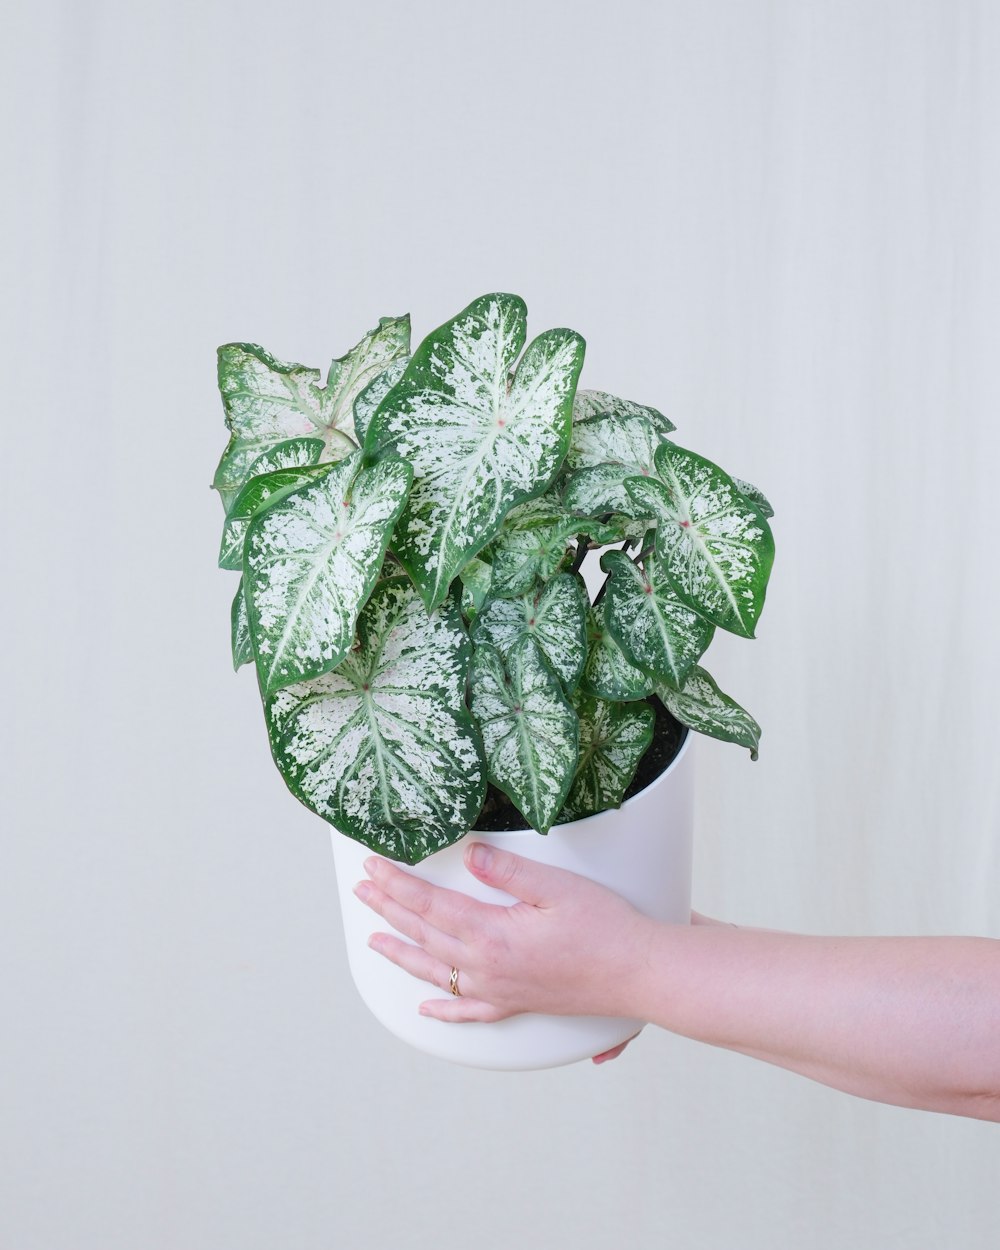 a person holding a potted plant with white leaves